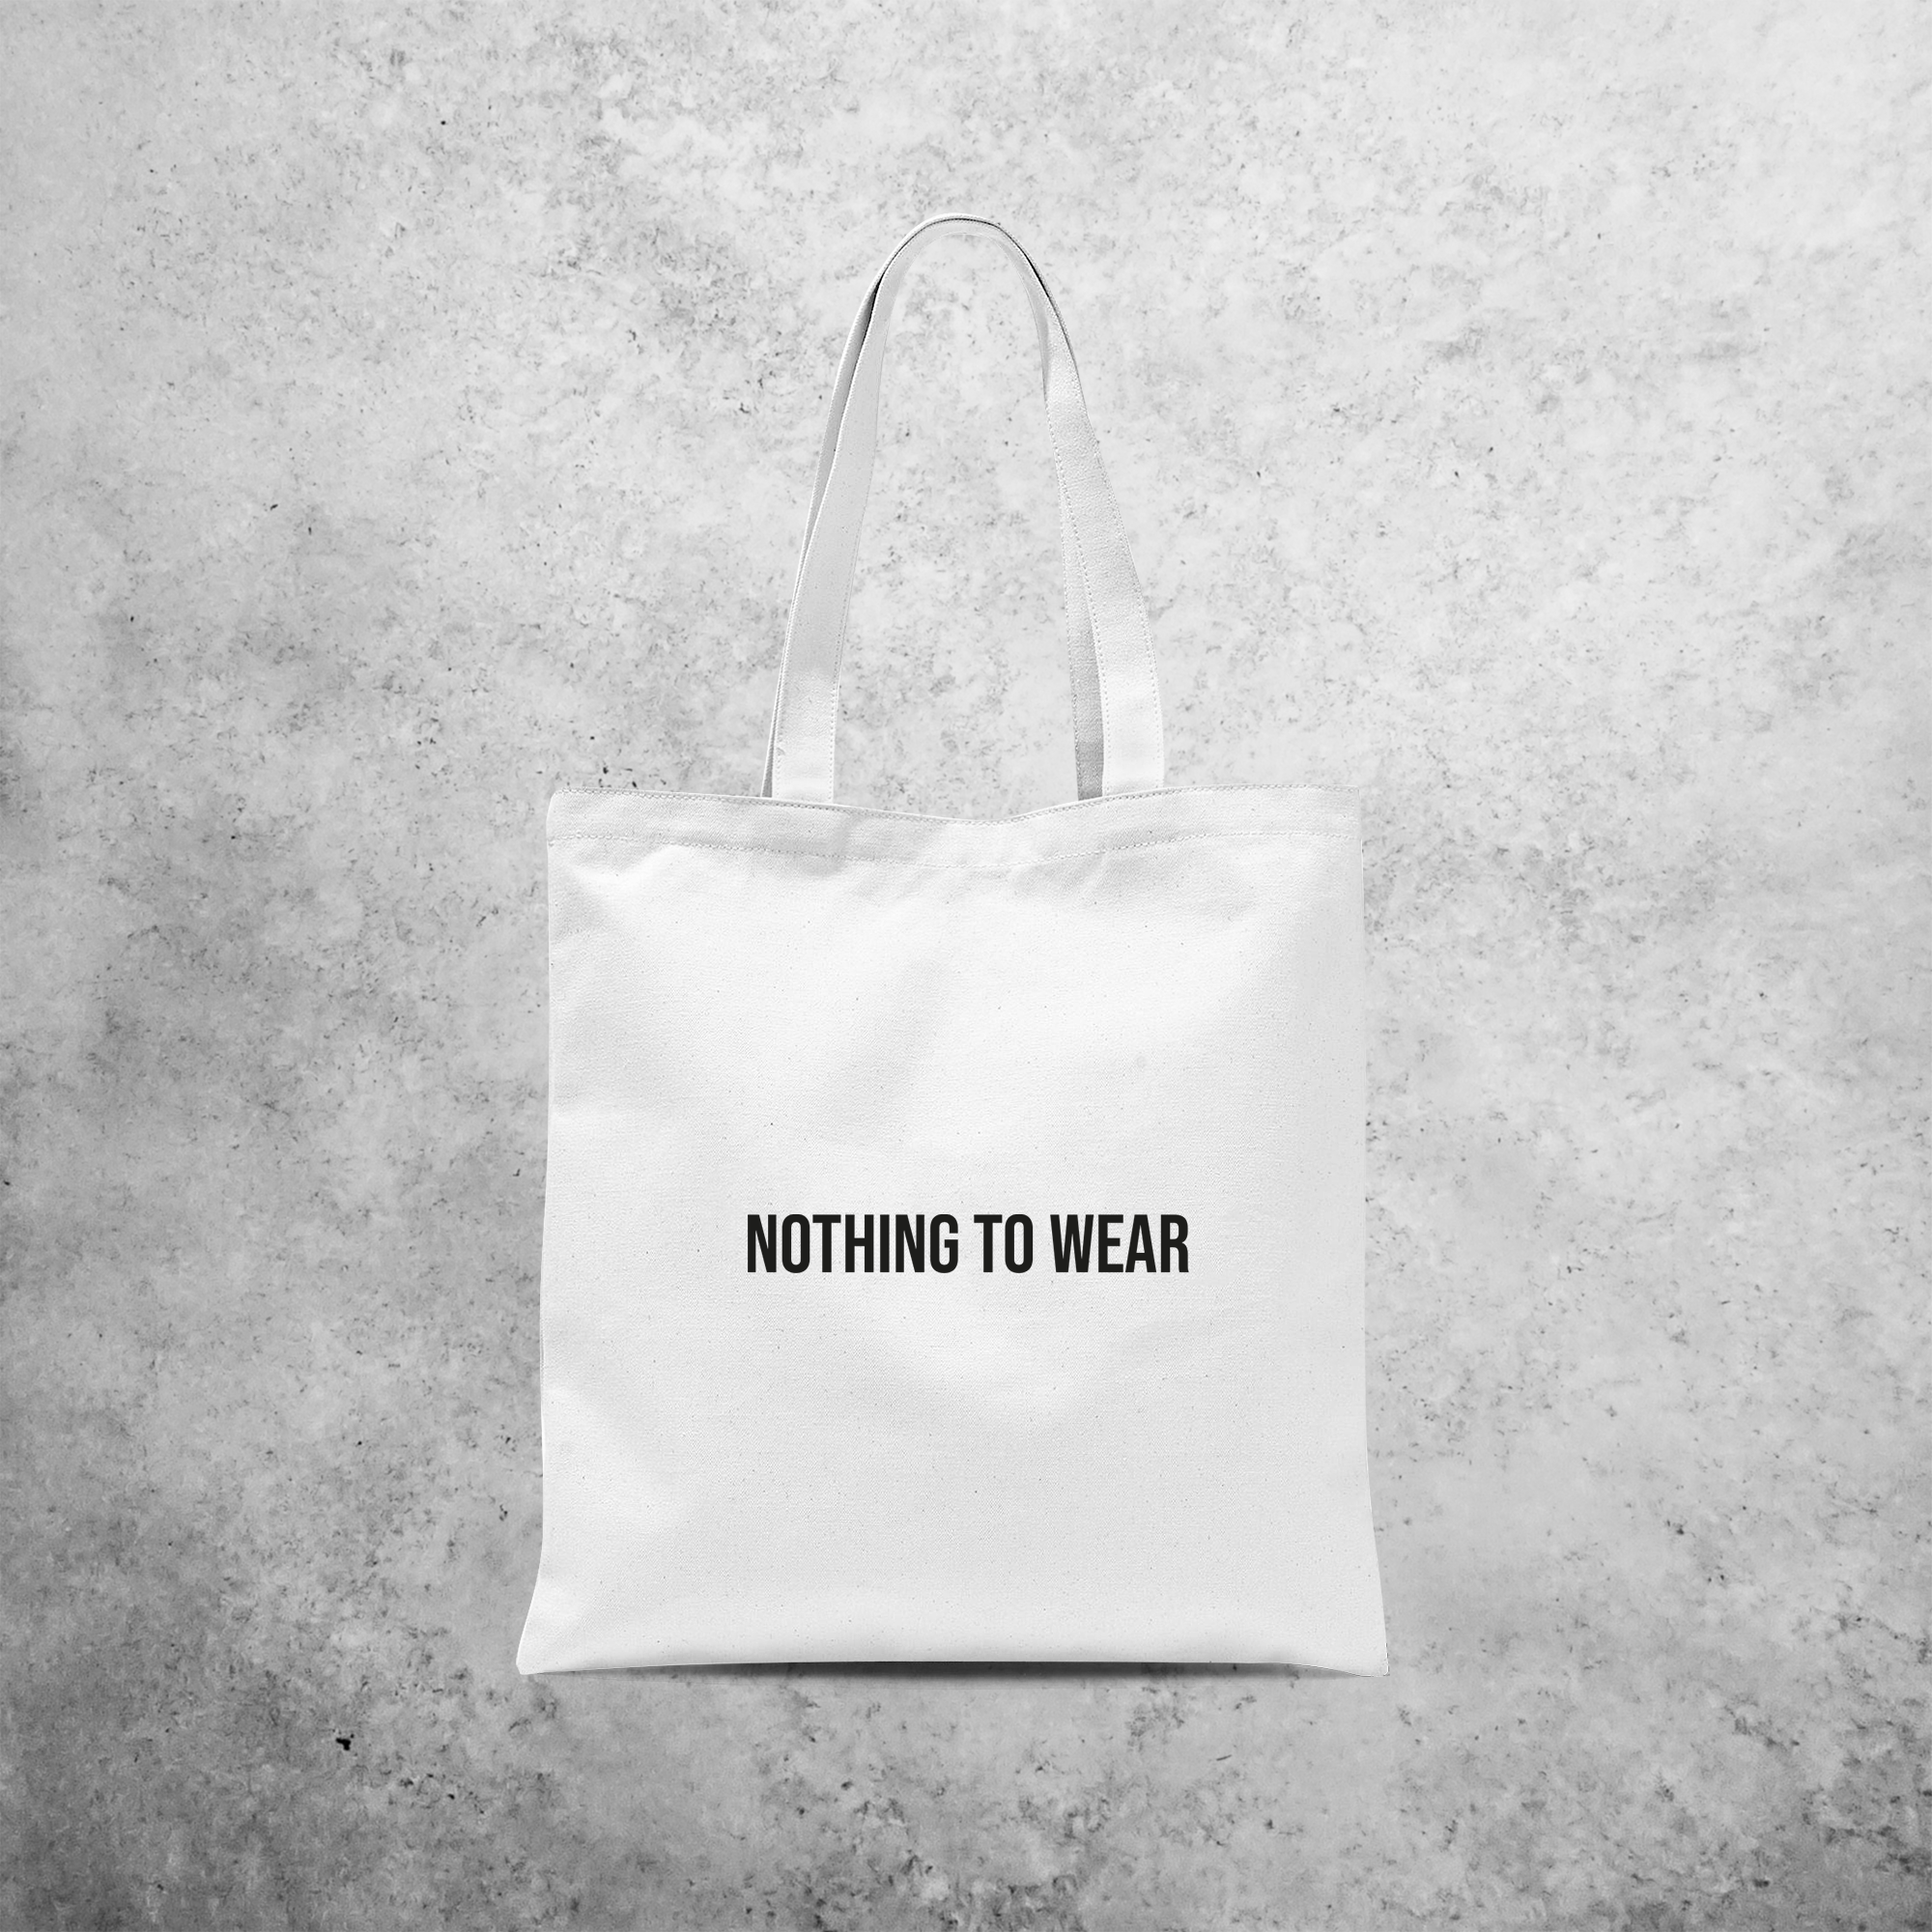 'Nothing to wear' tote bag